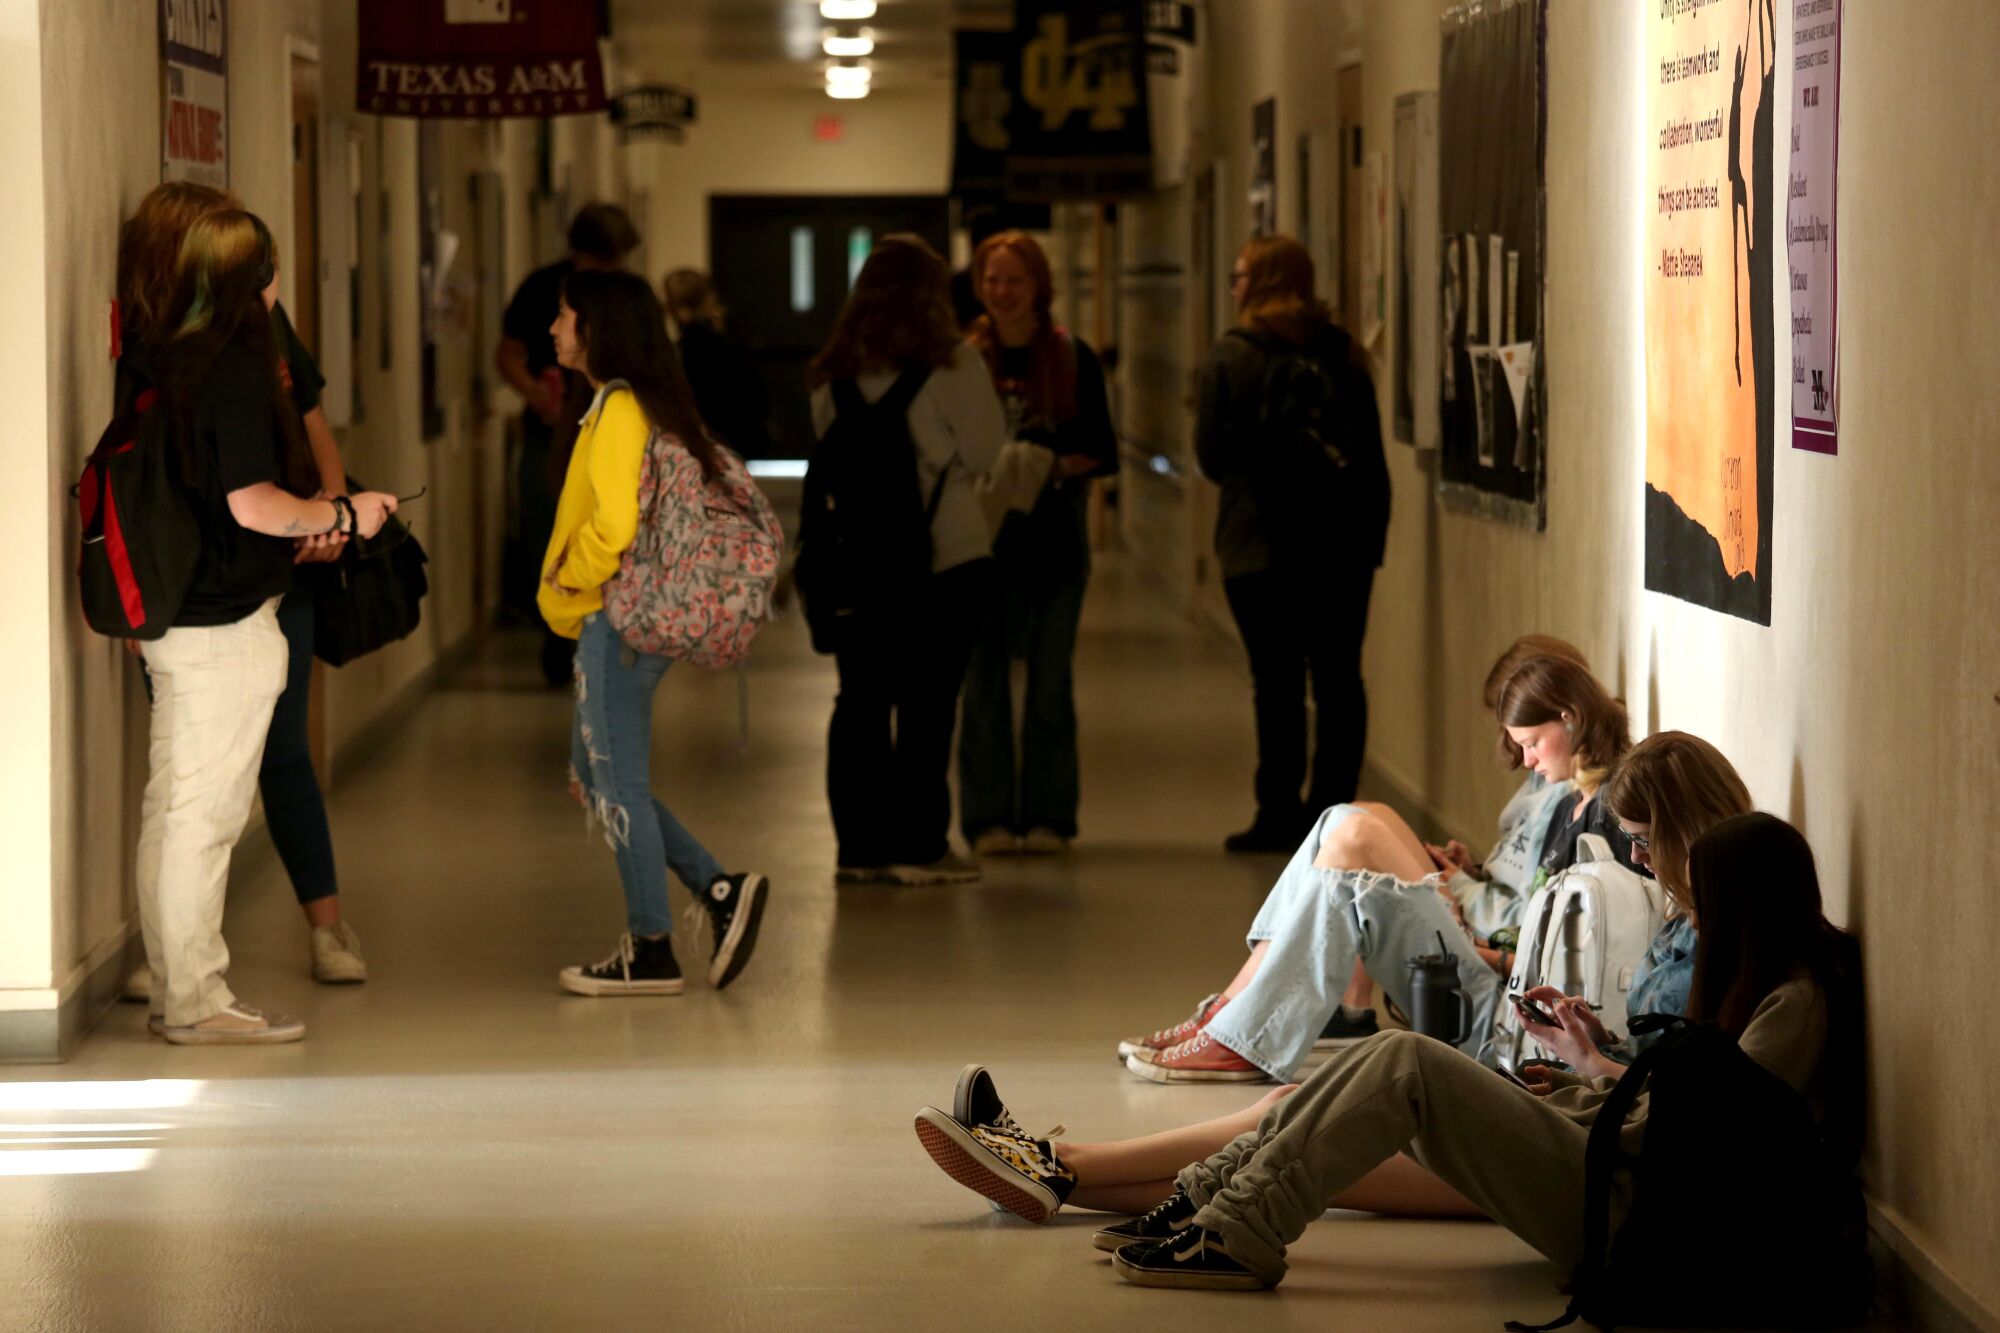 Students sit and stand in a hallway waiting for classes to begin.